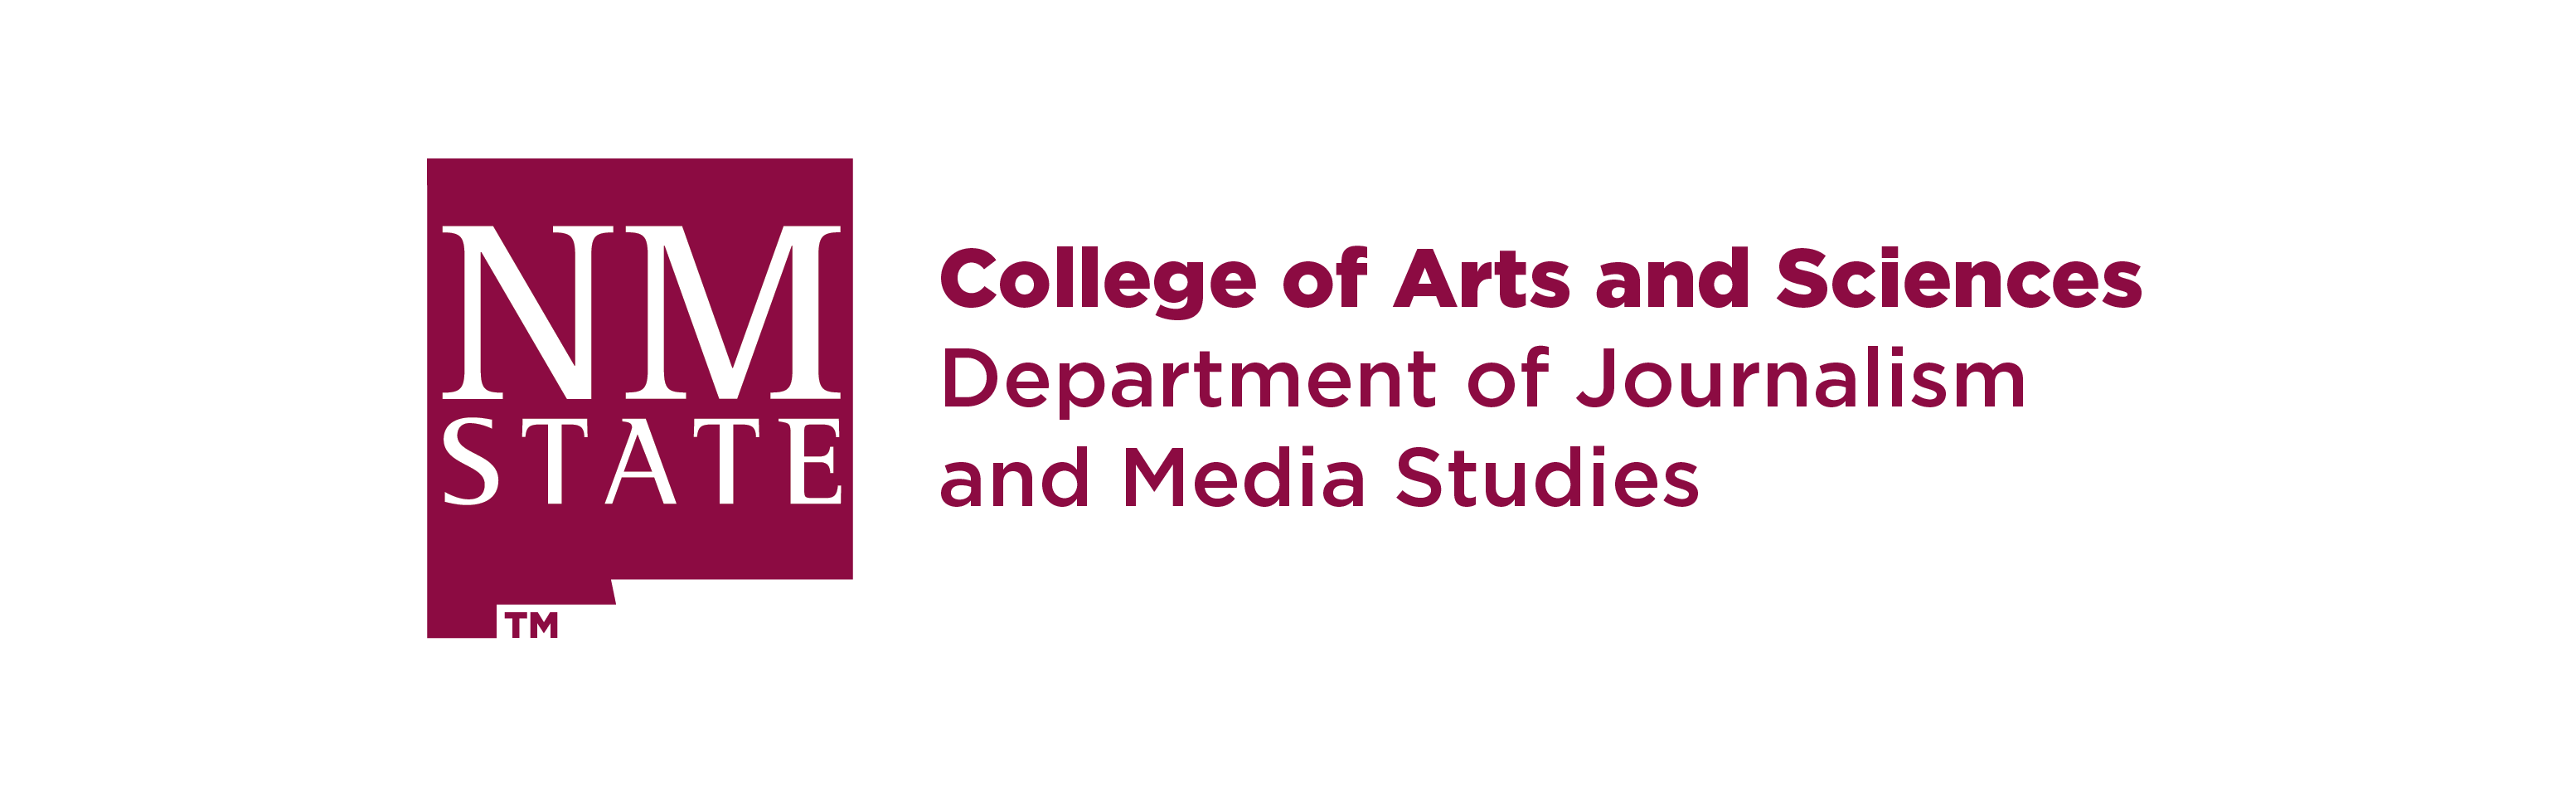 New Mexico State University  - Department of Journalism and Media Studies